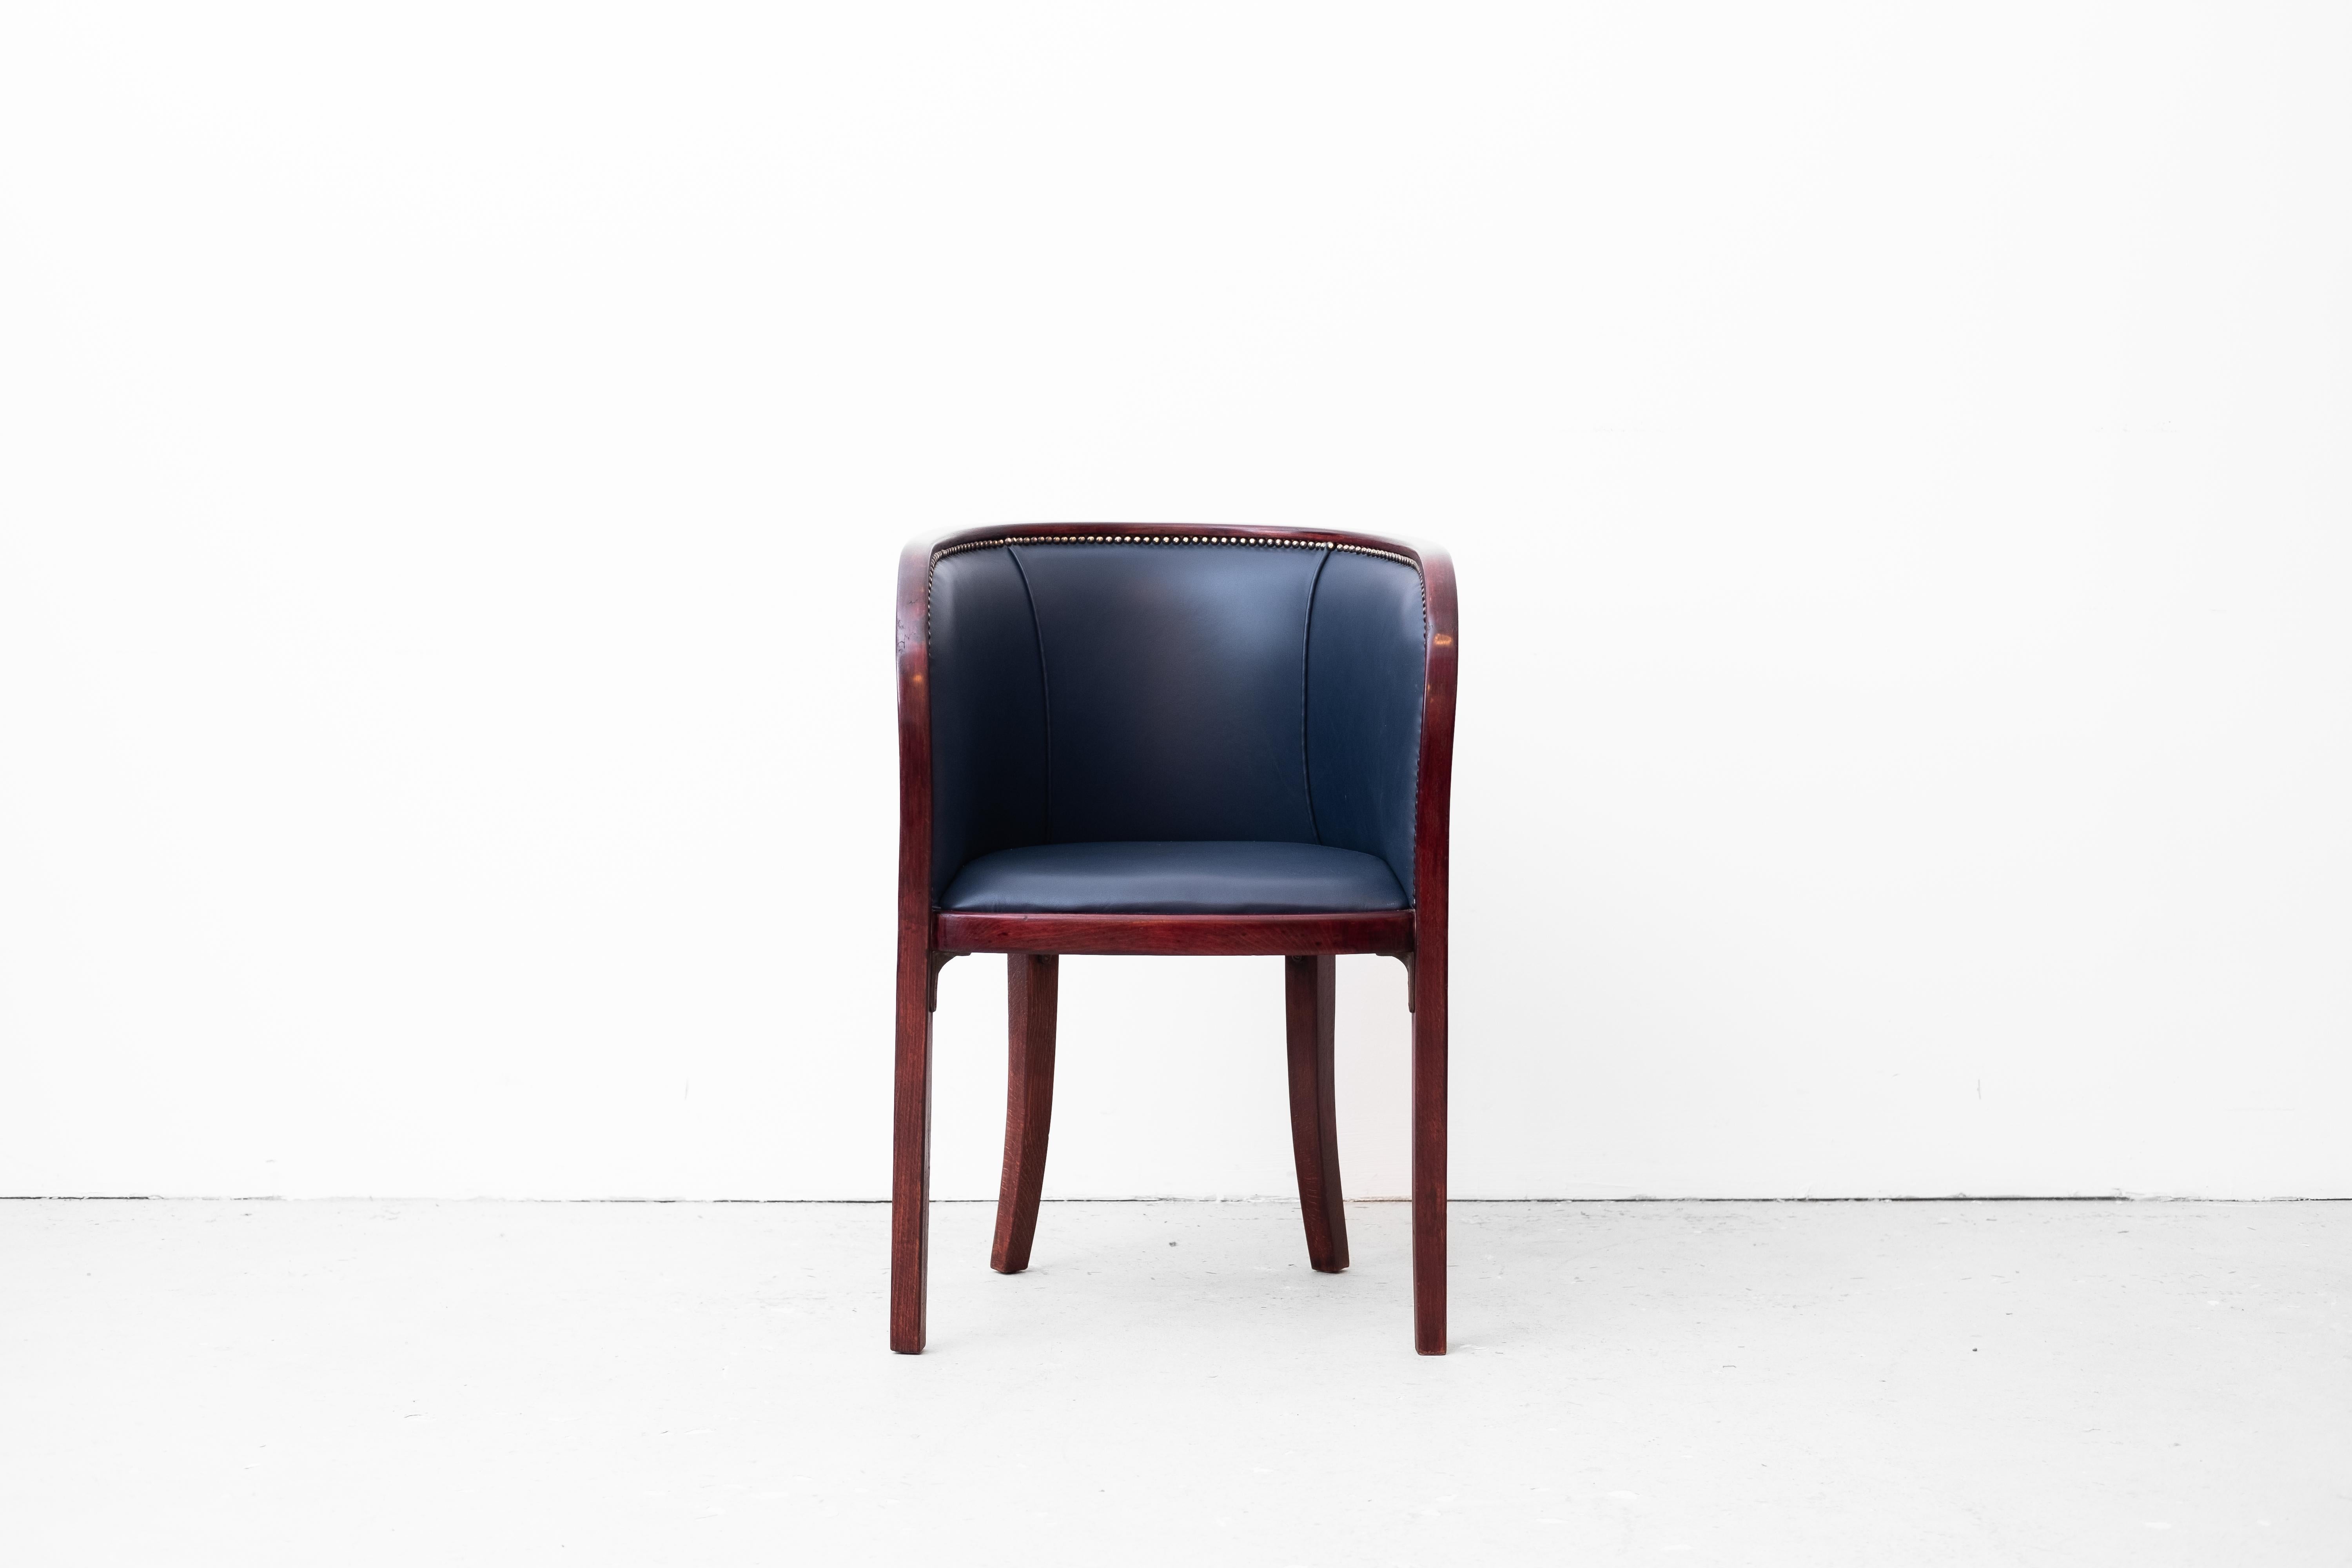 Vienna Secession Secession Armchair by Josef Hoffmann (1914), manufactured by Thonet (1919)